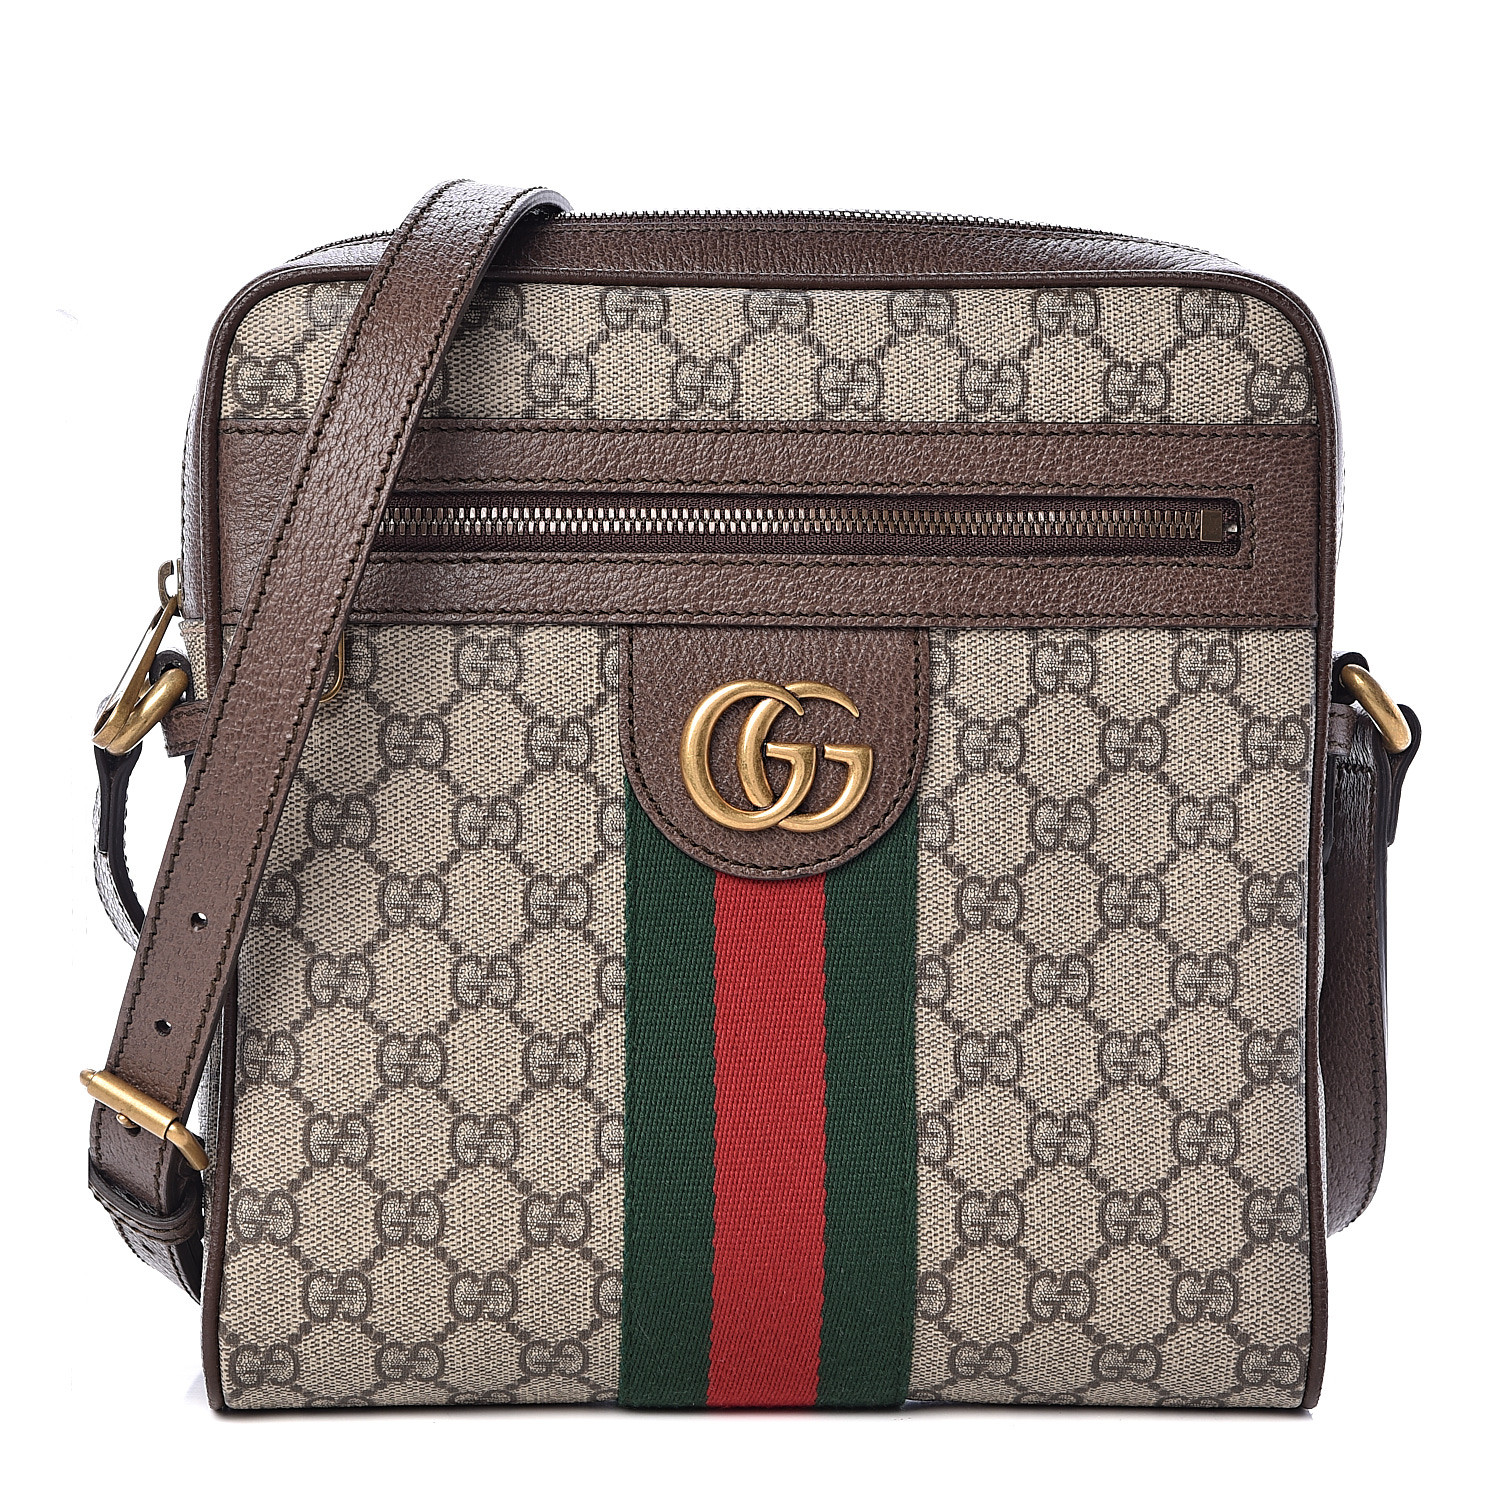 Gucci Beige Gg Supreme Small Ophidia Messenger Bag | IUCN Water